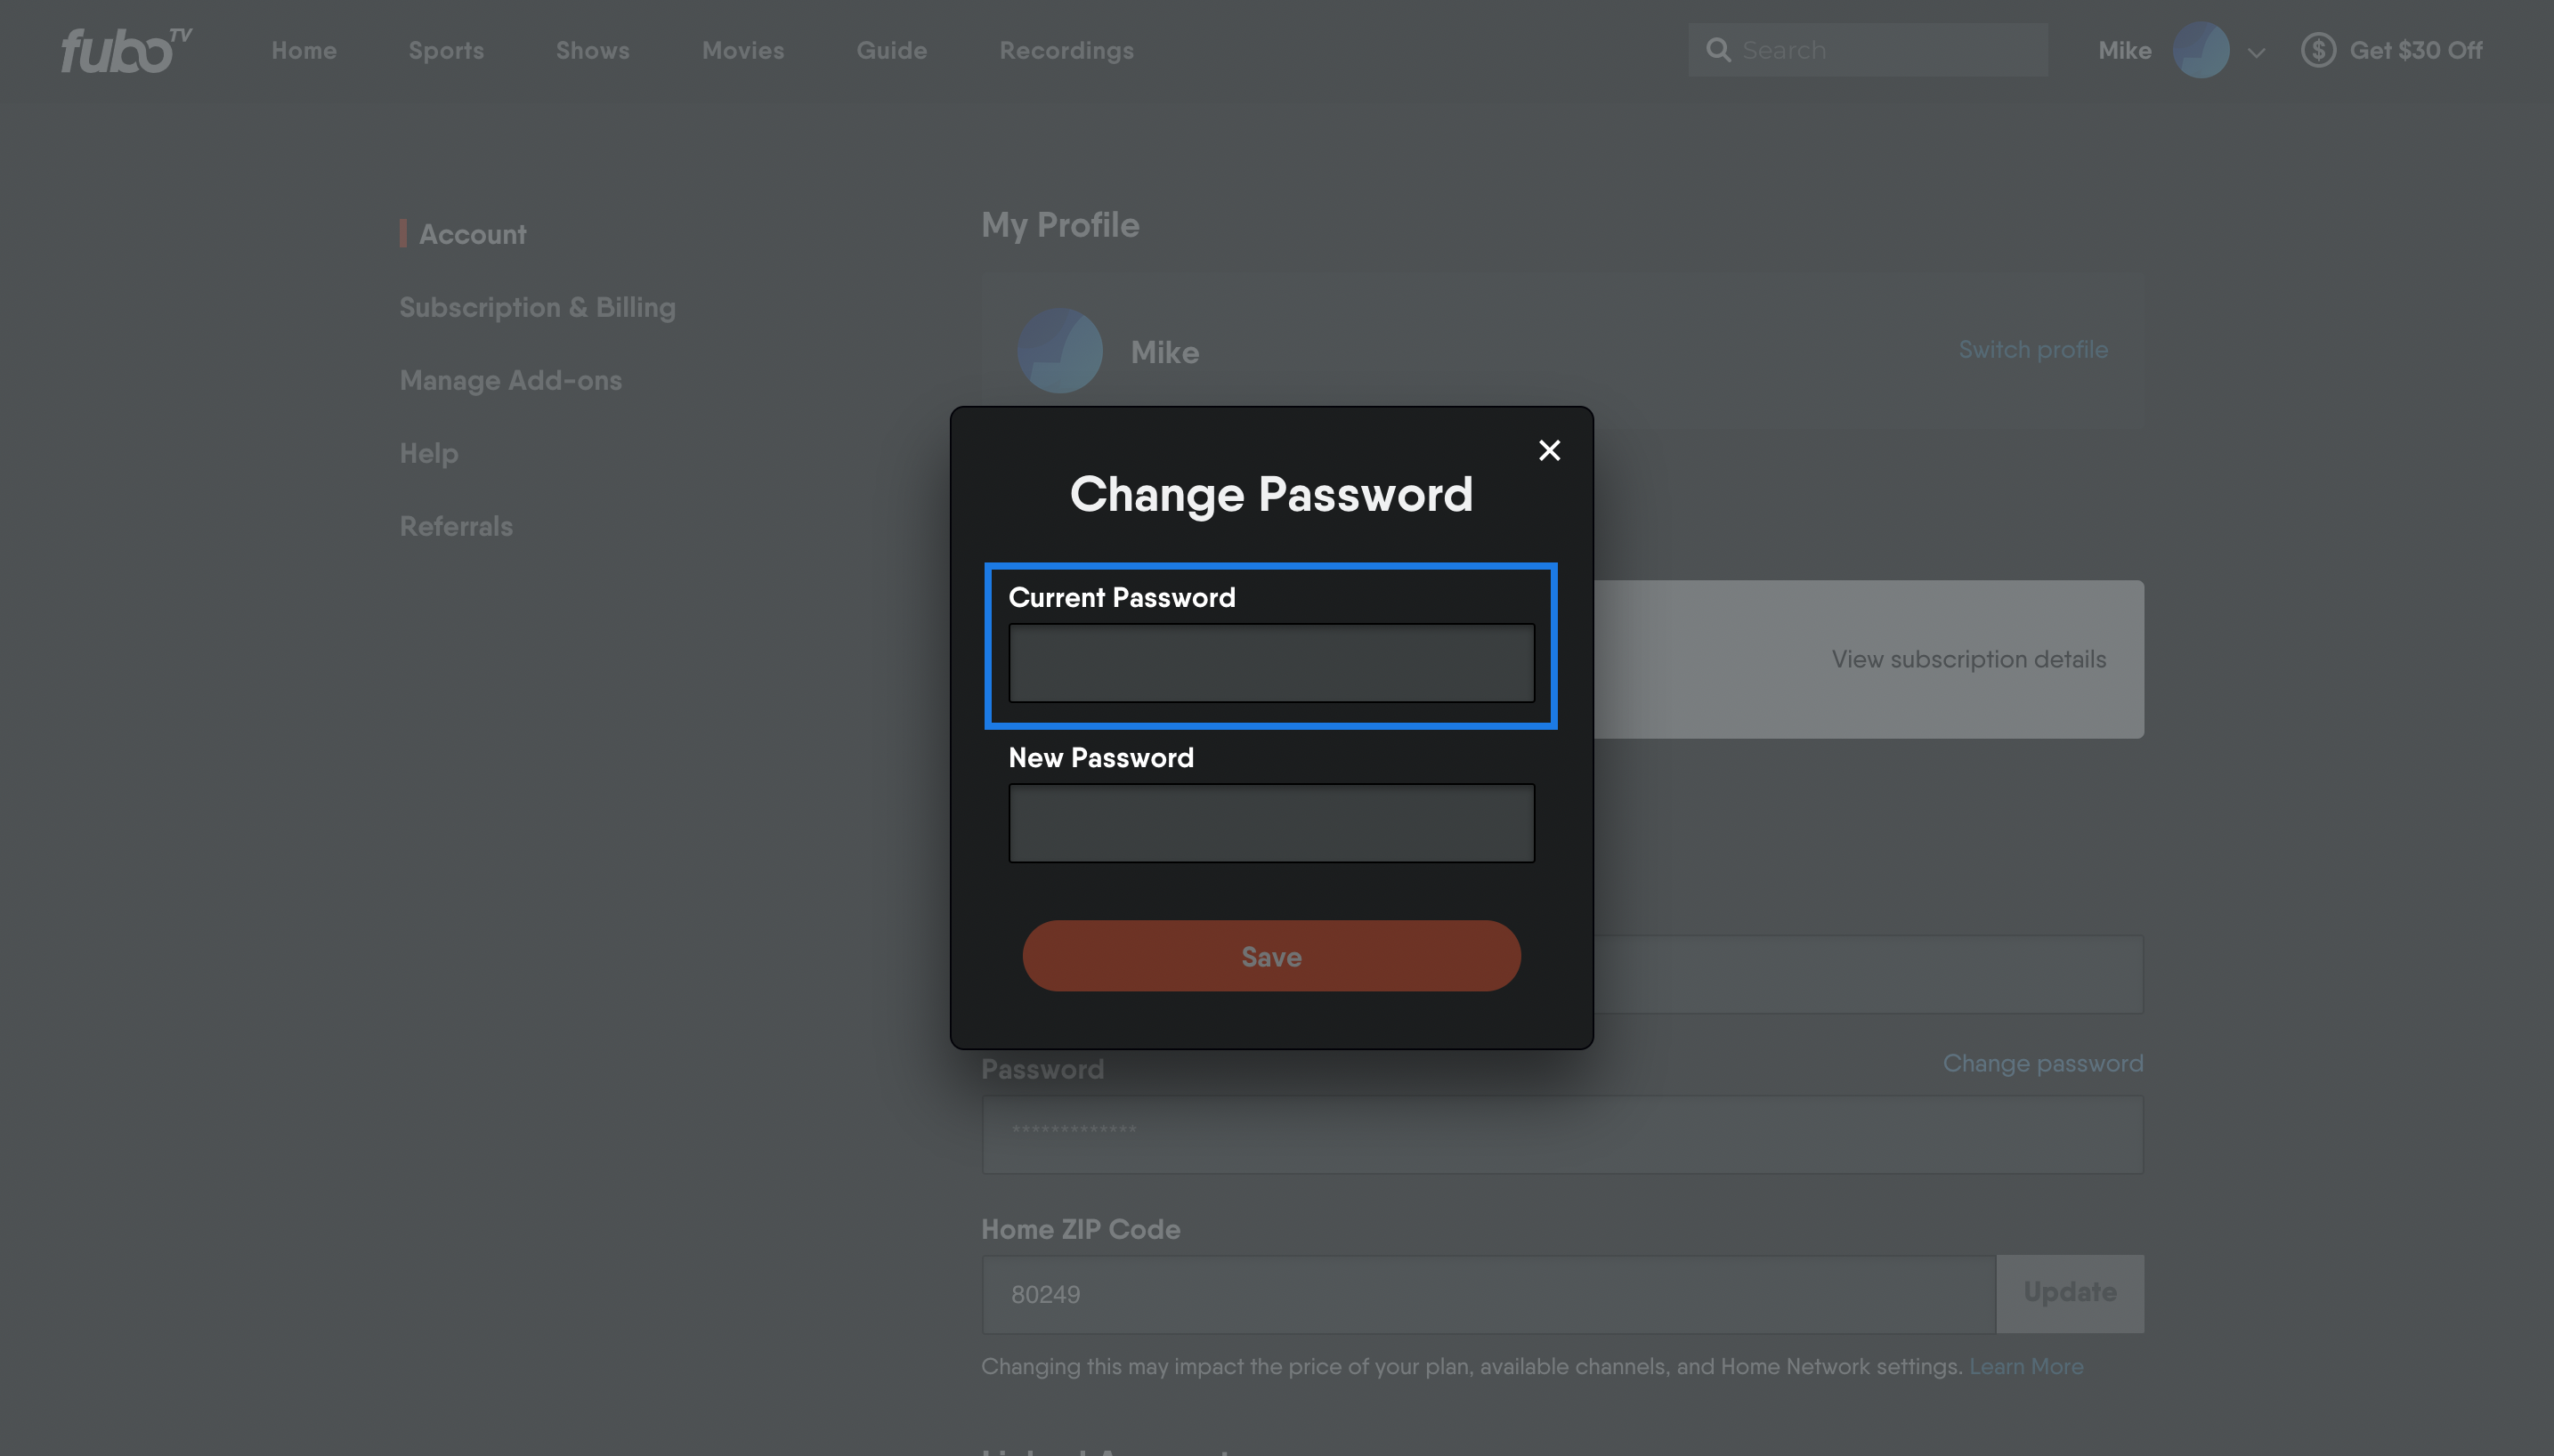 FuboTV CHANGE PASSWORD pop-up with CURRENT PASSWORD window highlighted